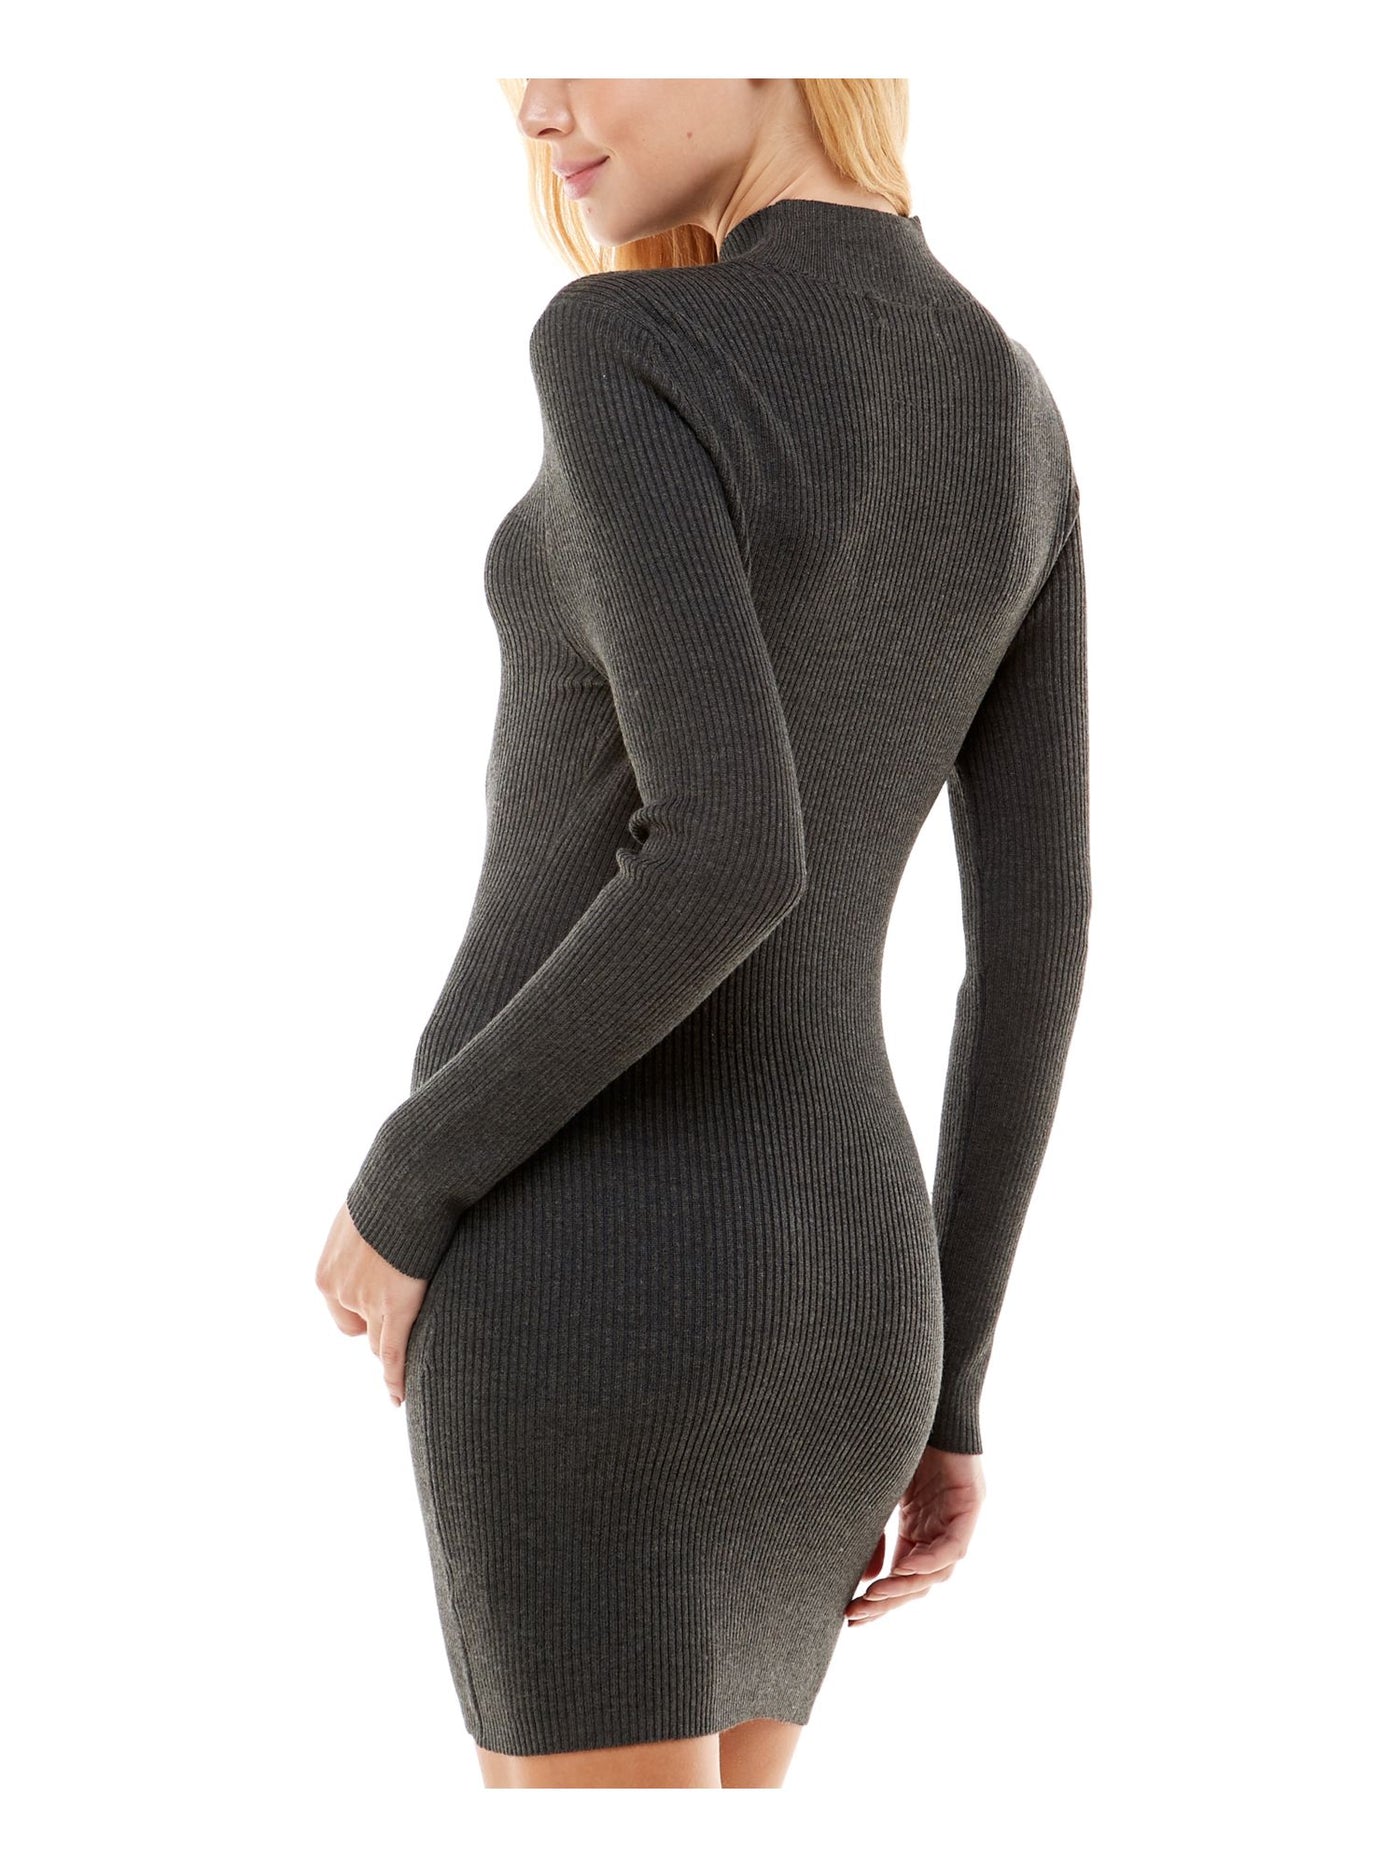 NO COMMENT Womens Gray Ribbed Cut Out Long Sleeve Mock Neck Short Party Sweater Dress Juniors M